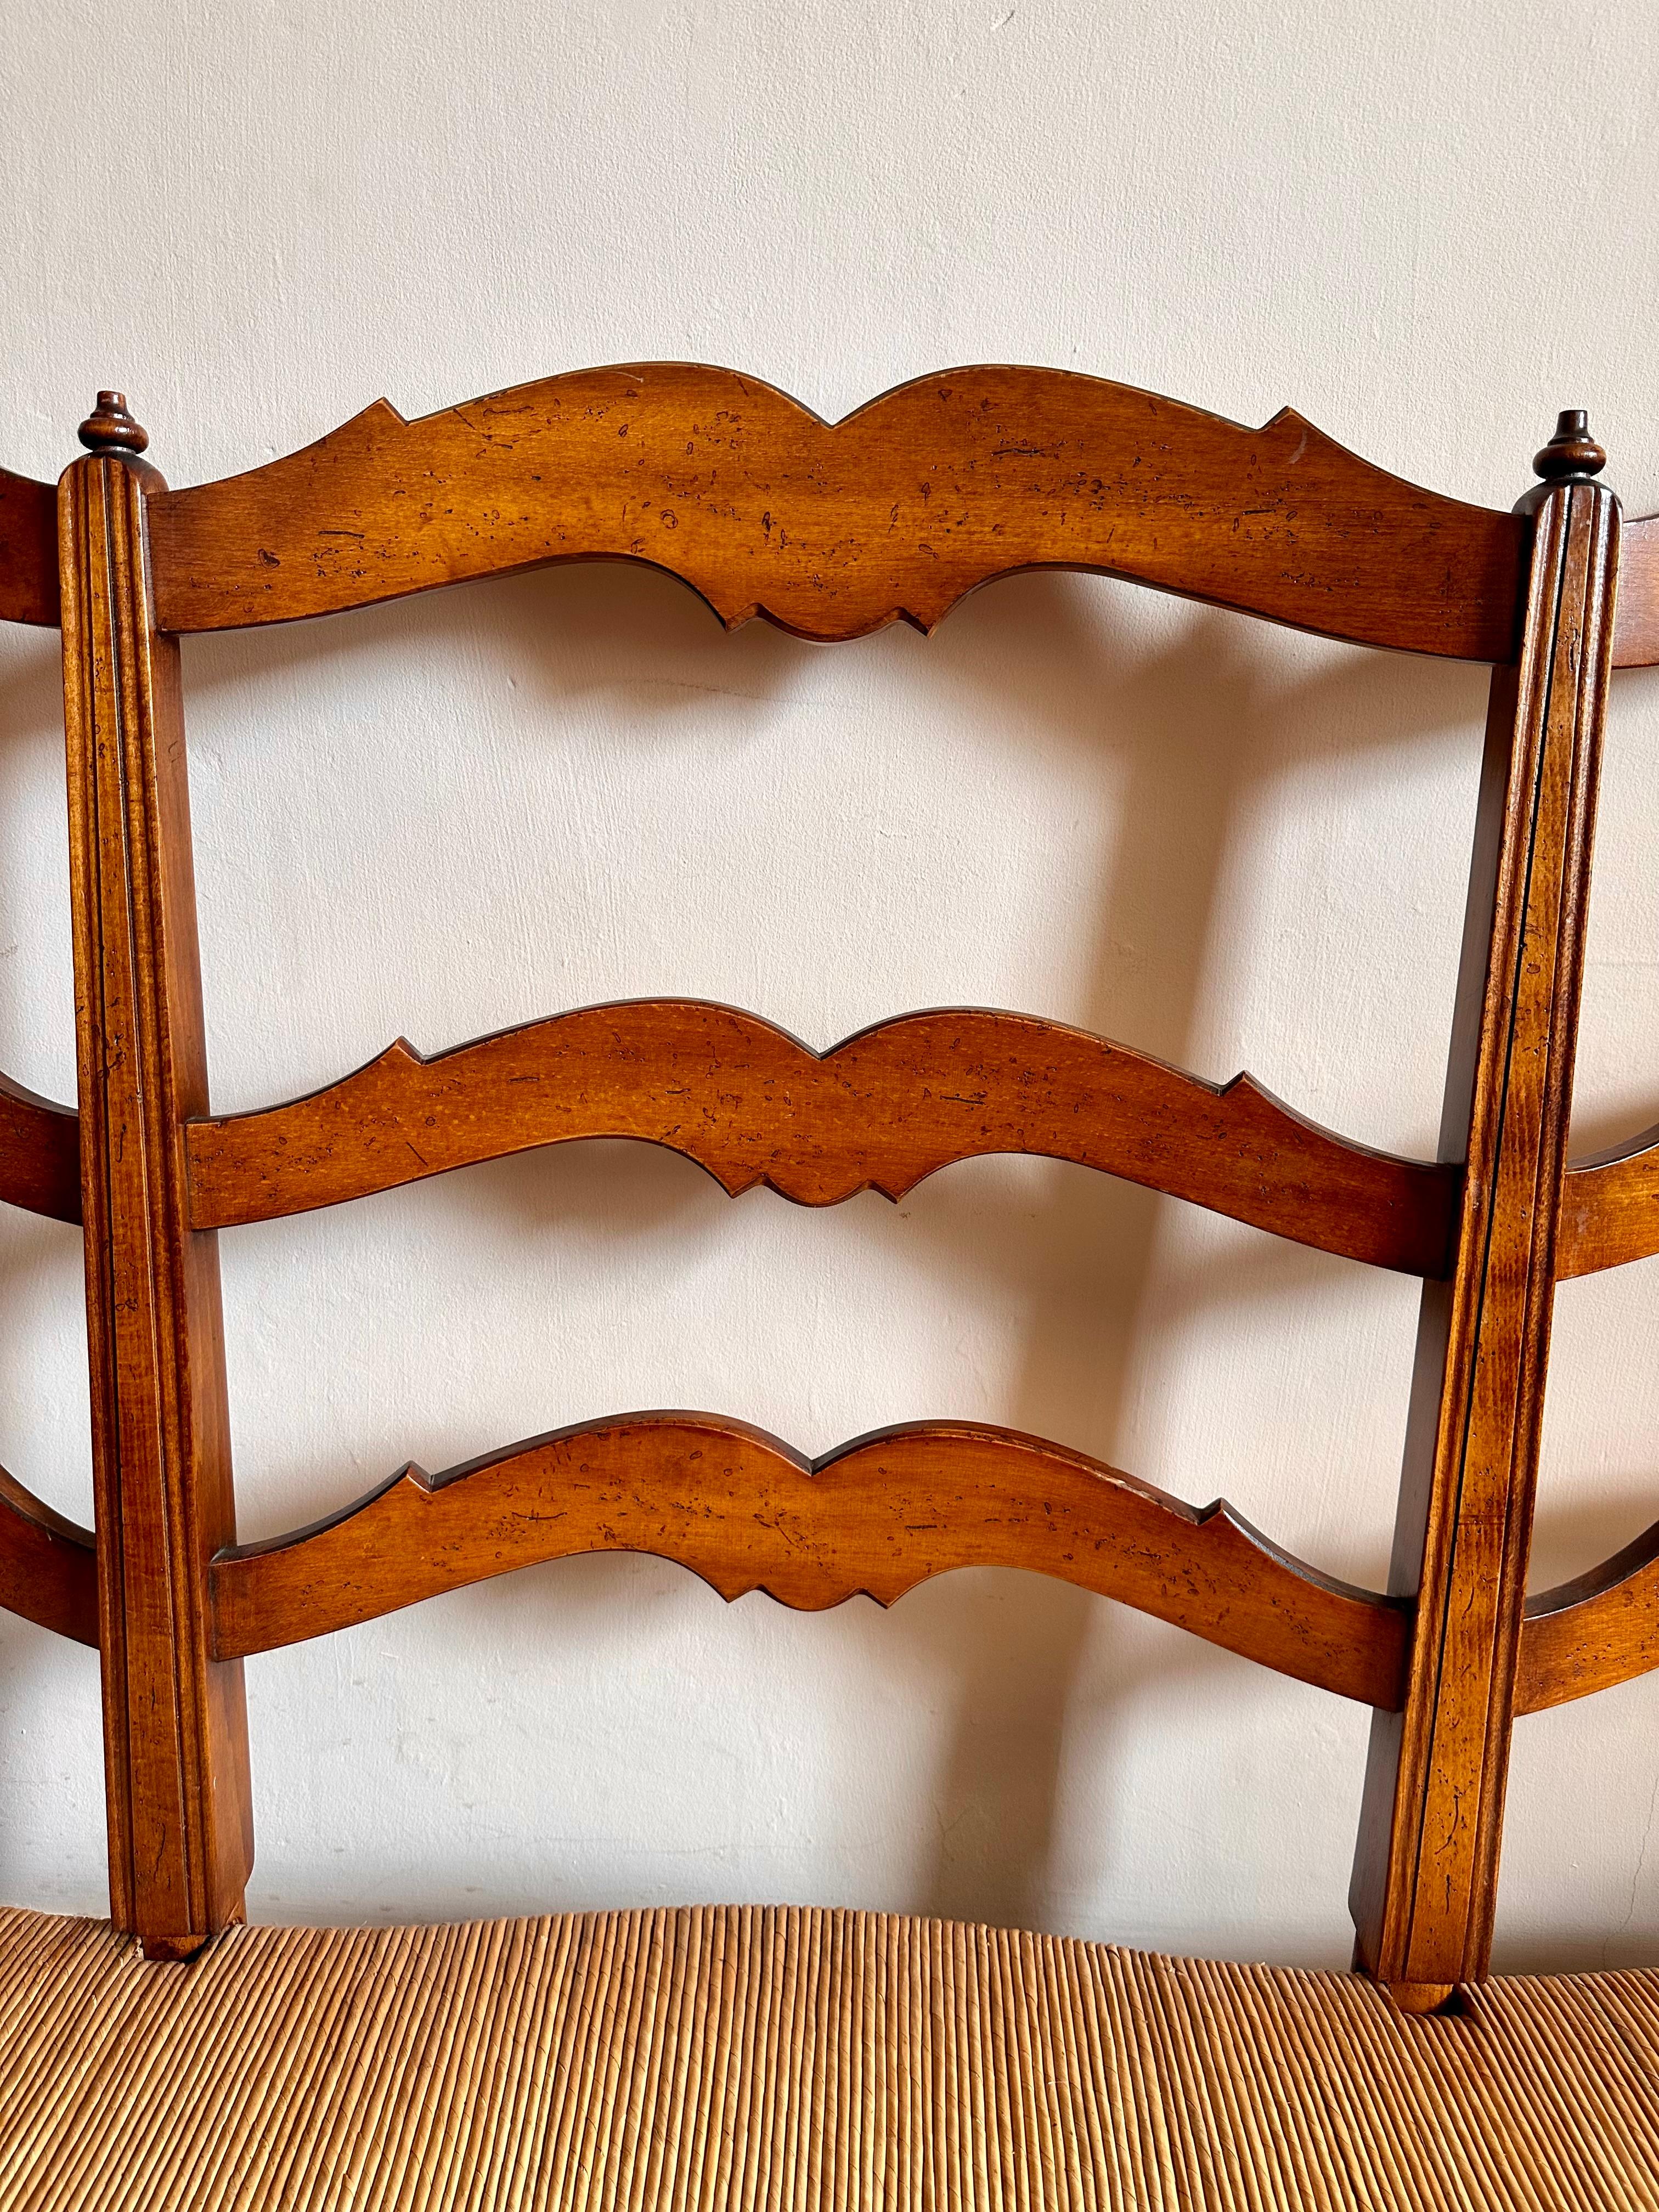 Large C19th Provencal Cherry Wood Rush Seat Bench In Good Condition For Sale In London, GB